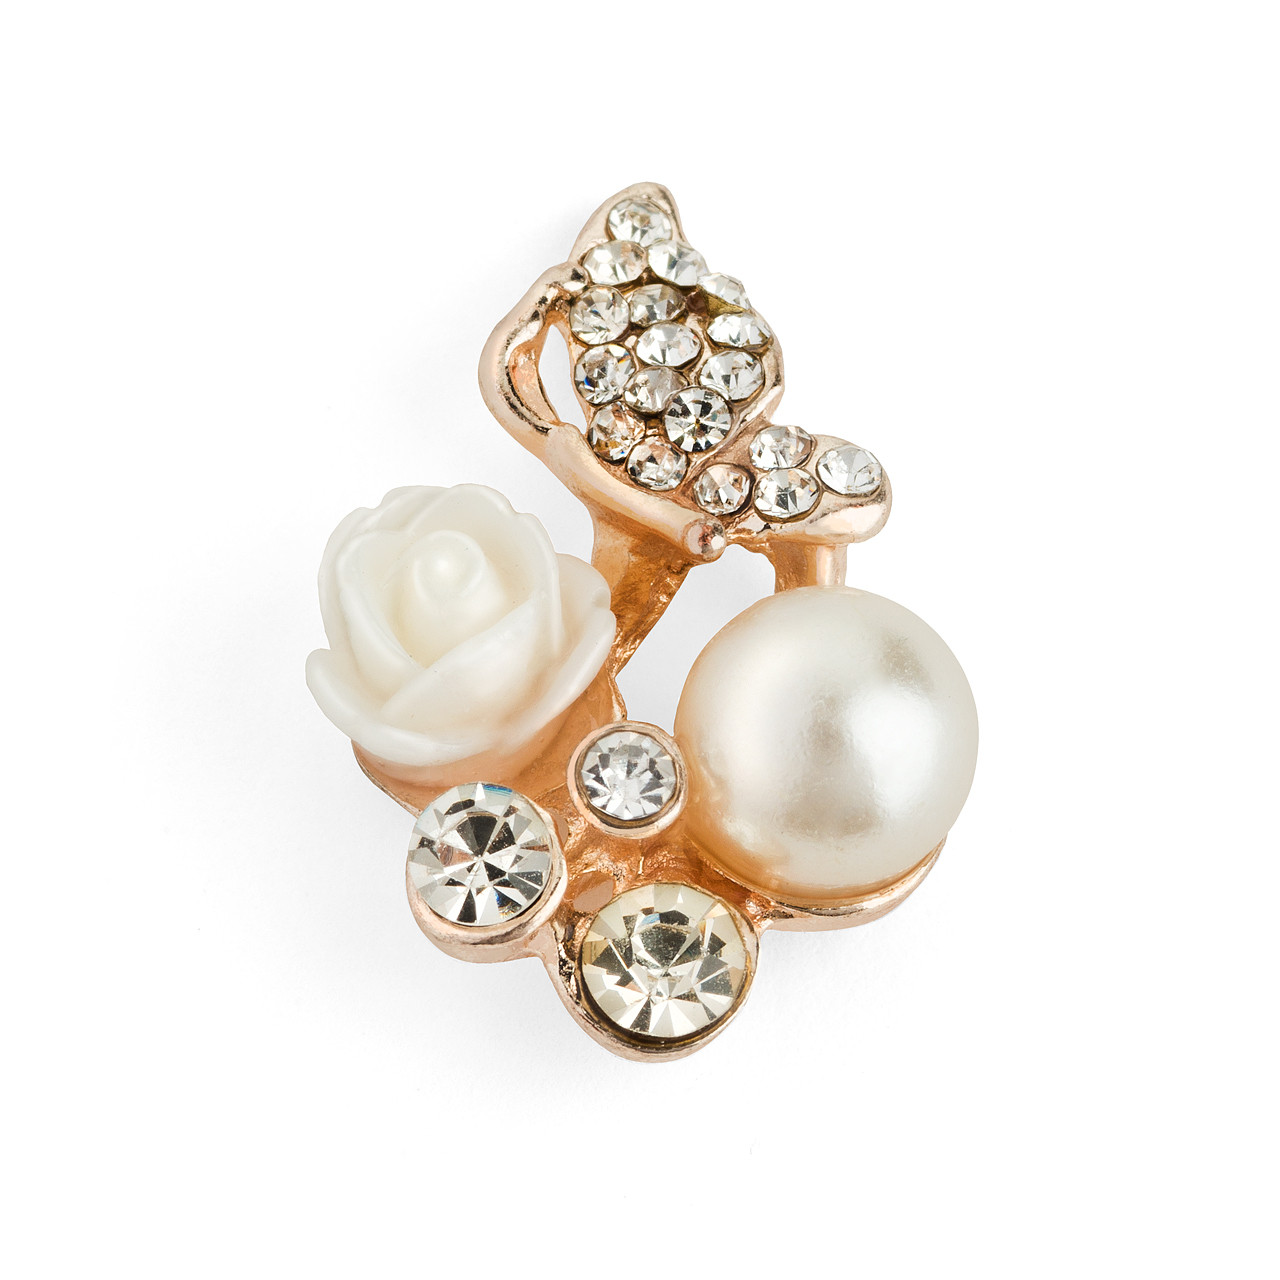 Faux Pearl Rose with Rhinestones Embellishment | FavorVillage